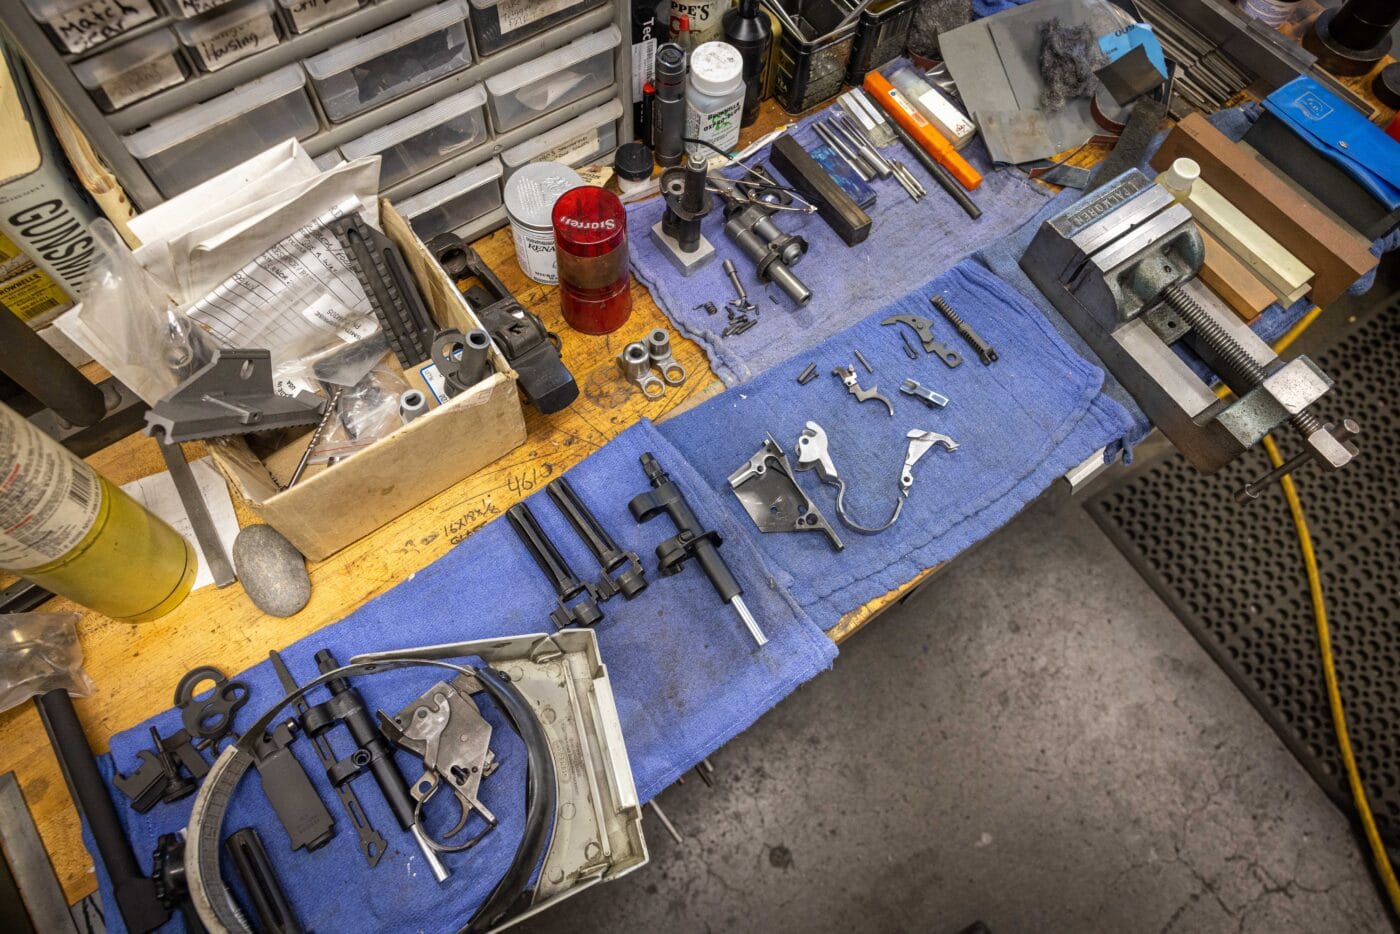 Workbench at Smith Enterprise while building the M1A Crazy Horse rifle